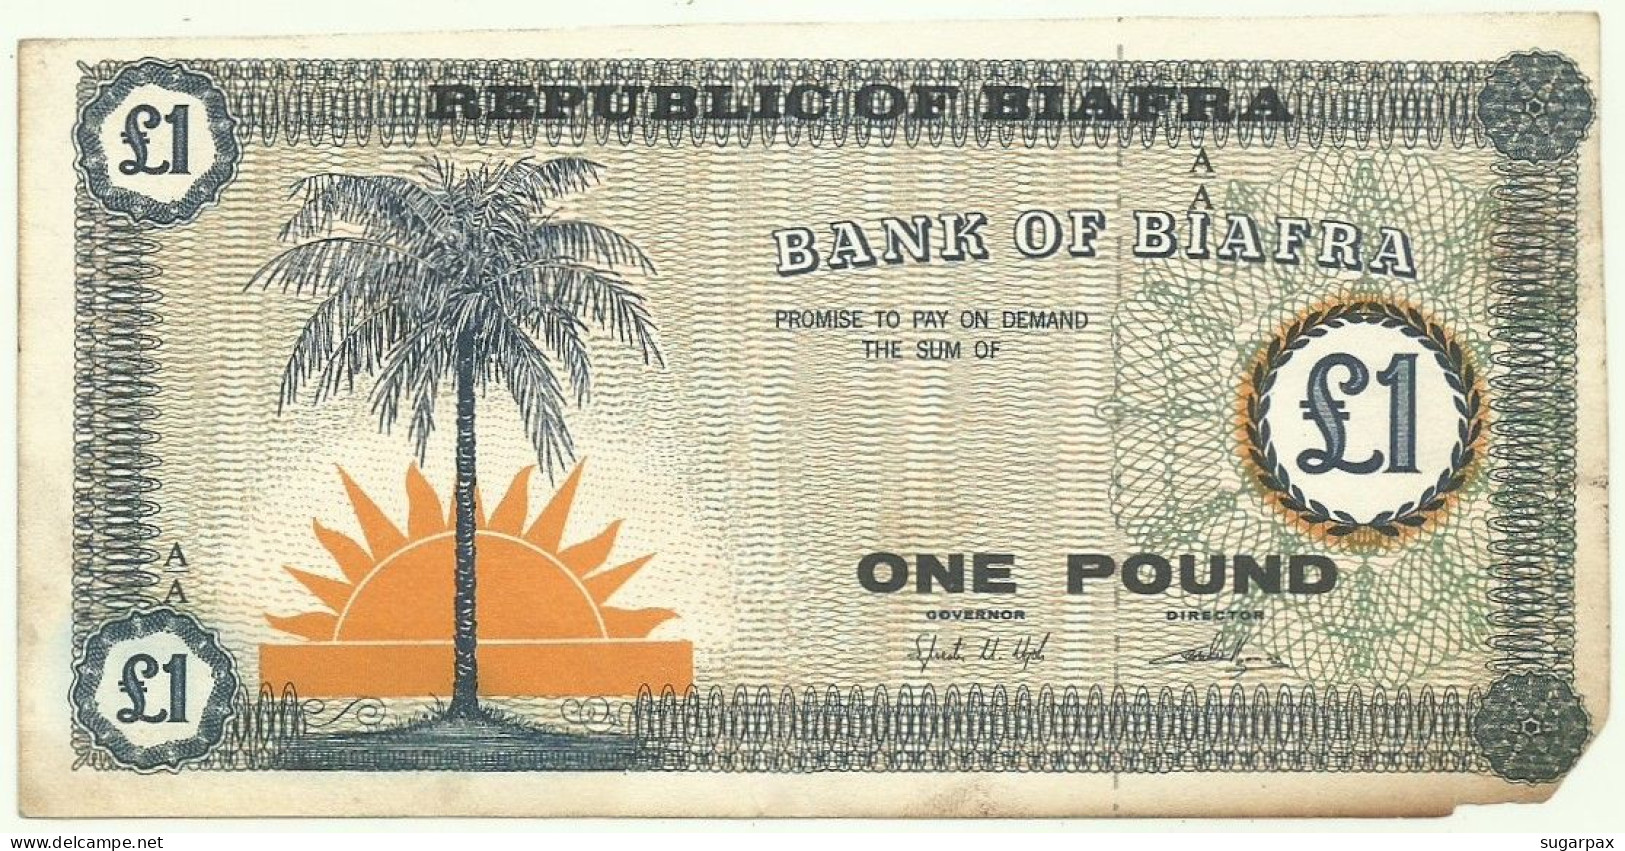 BIAFRA - 1 Pound - ND ( 1967 ) - P 2.b ? - RRRRR - WITHOUT Serial # - NOT Cataloged - NIGERIA ( Africa ) - Nigeria